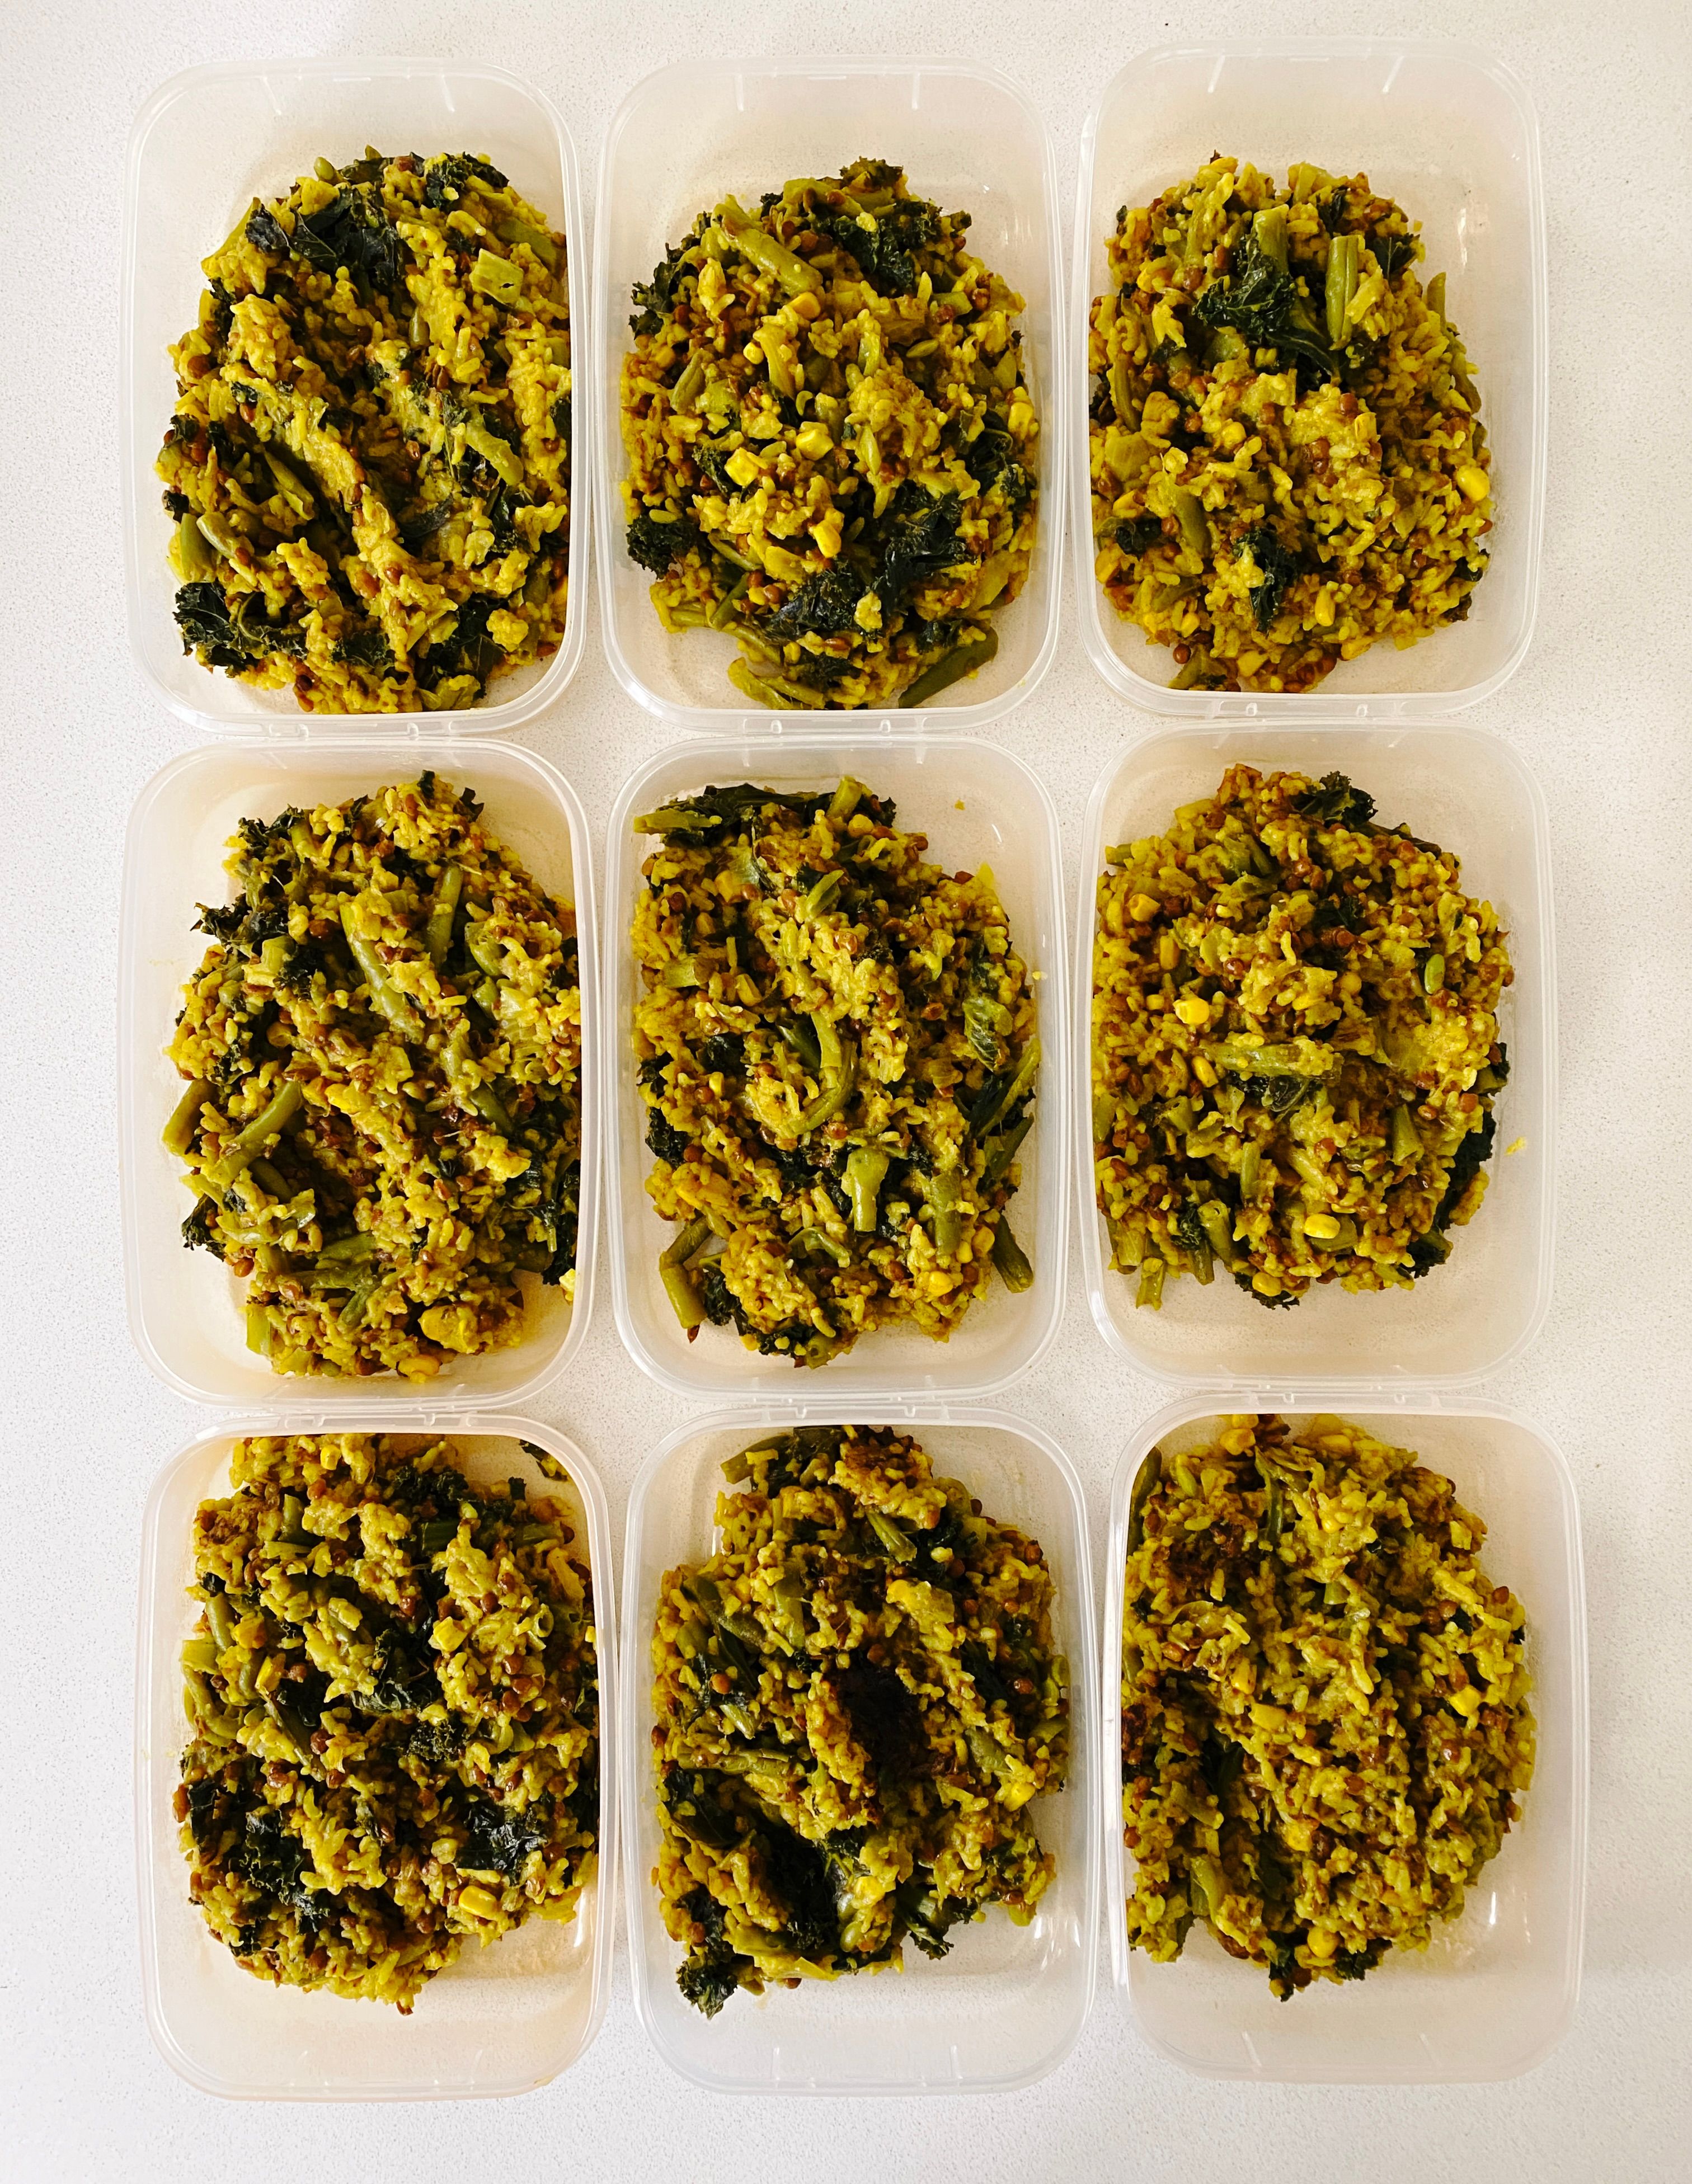 A top-down photo of nine individual Tupperware containers sitting on a white kitchen benchtop. The Persian seasoning has turmeric in it so the rice is VERY yellow.